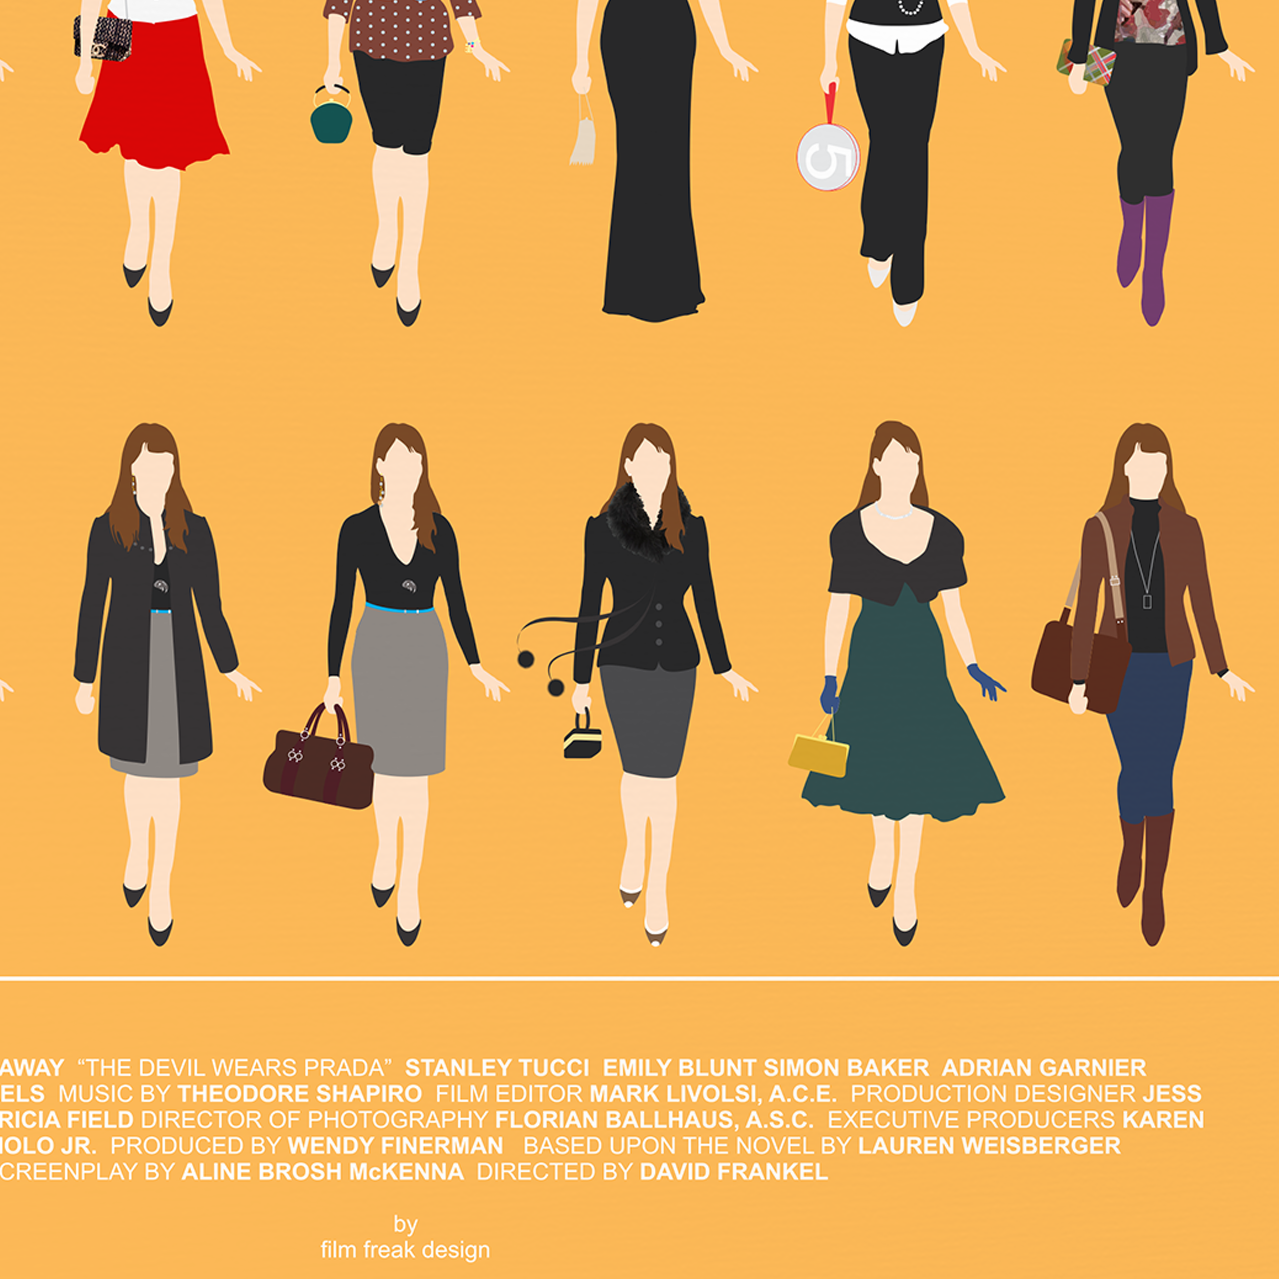 The Devil Wears Prada 'Andy Sachs' all looks - Anne Hathaway